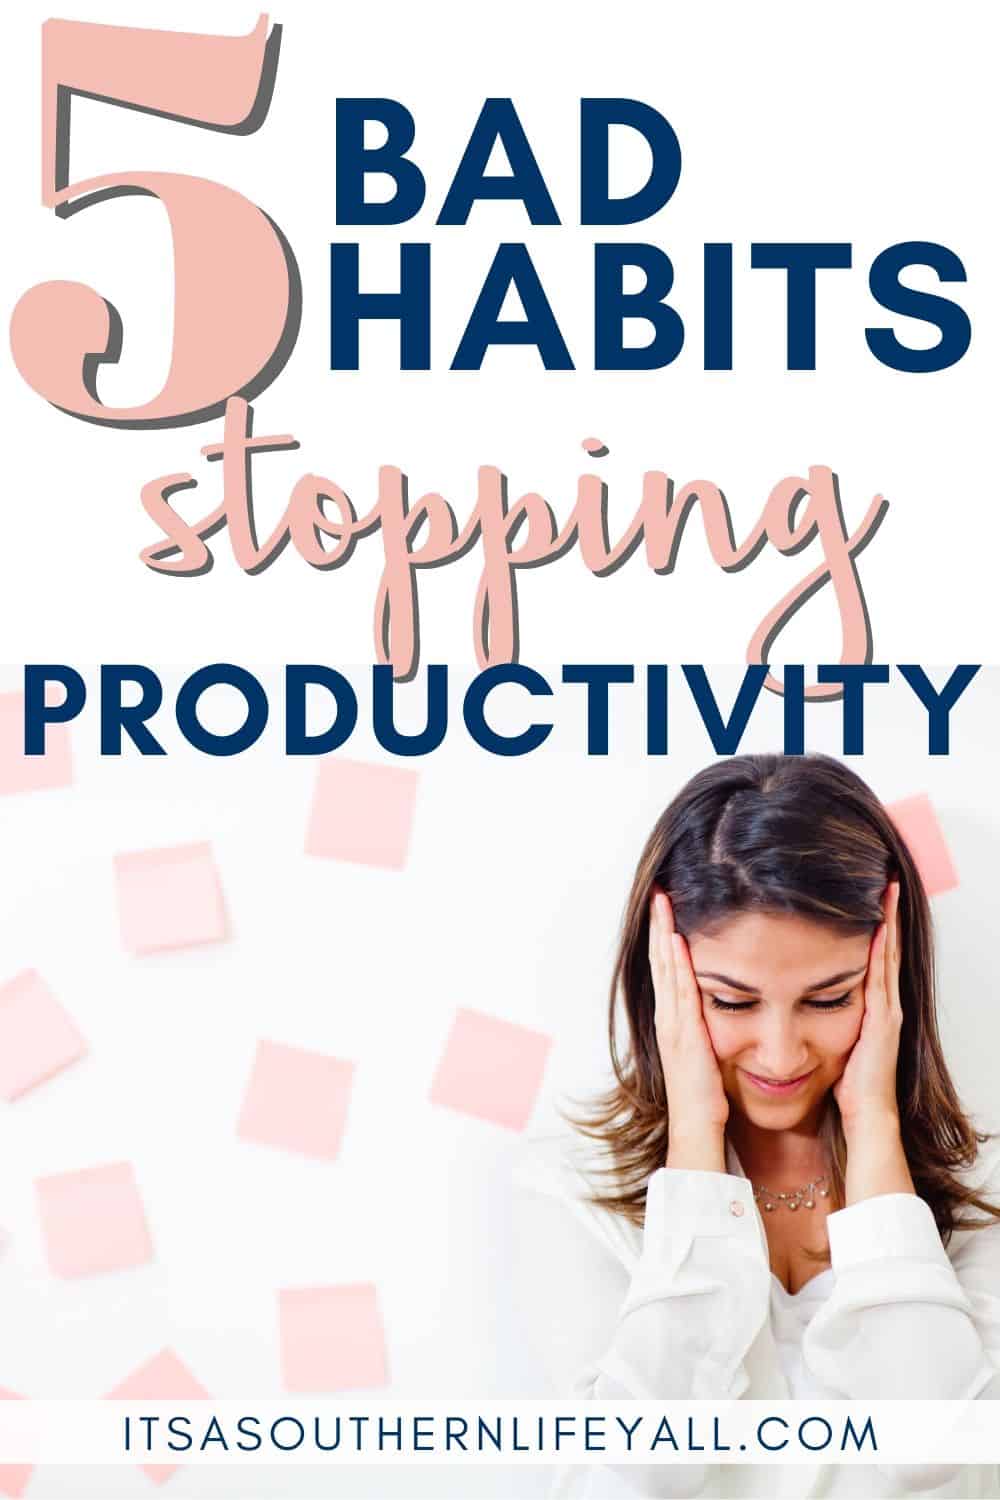 Woman holding her face with post it notes around her with 5 bad habits stopping productivity text overlay.